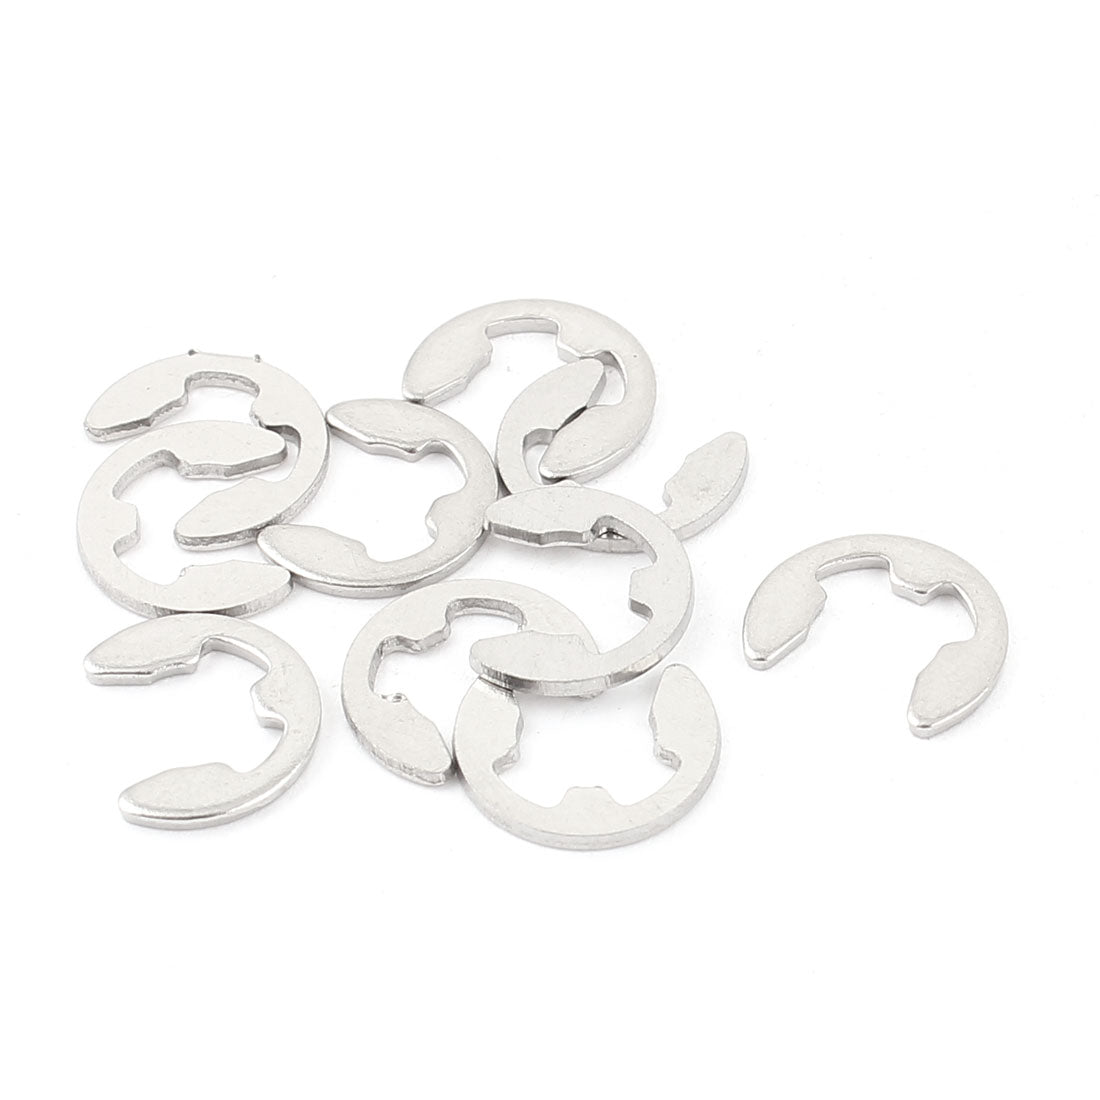 uxcell Uxcell 10pcs 304 Stainless Steel Fastener External Retaining Ring E-Clip Circlip 6mm